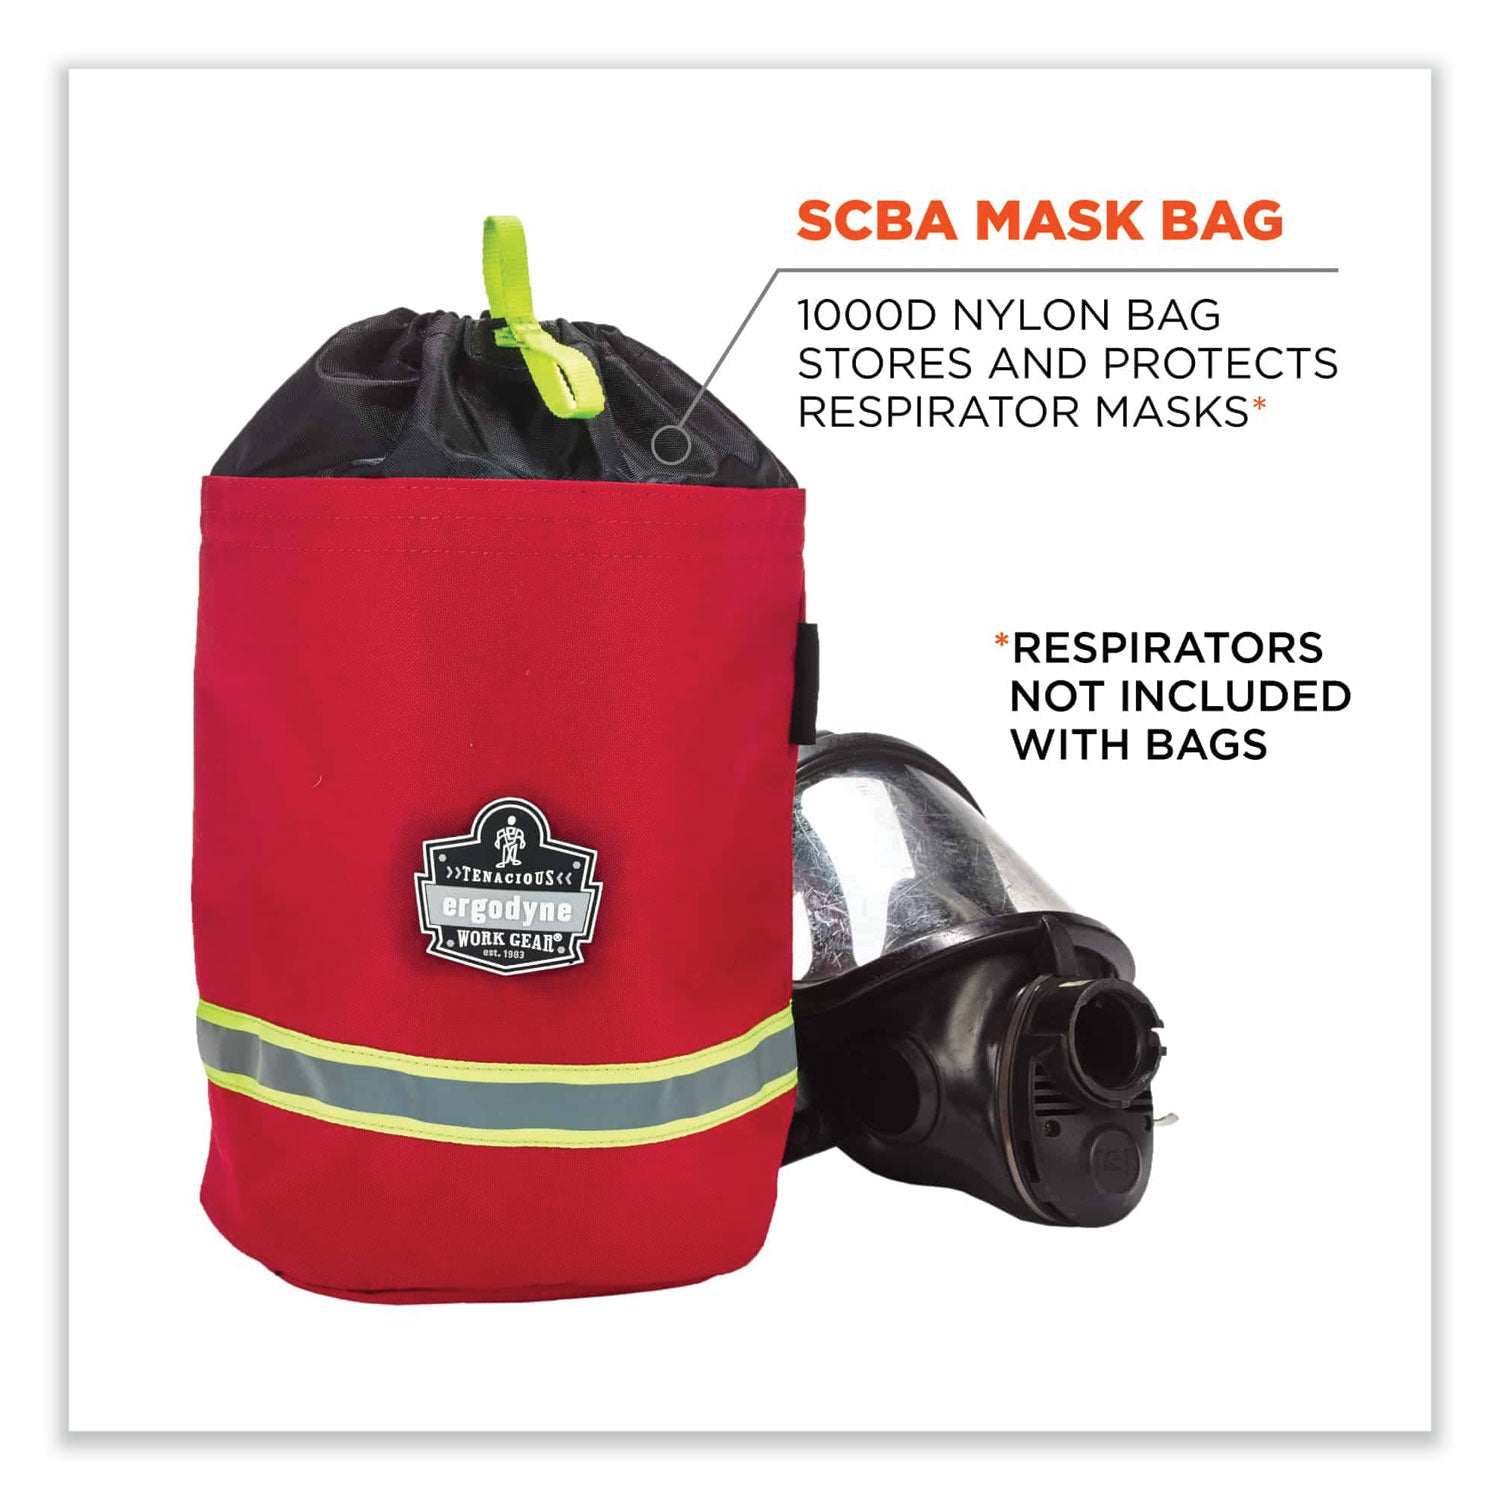 arsenal-5080-scba-mask-bag-85-x-85-x-14-red-ships-in-1-3-business-days_ego13080 - 3